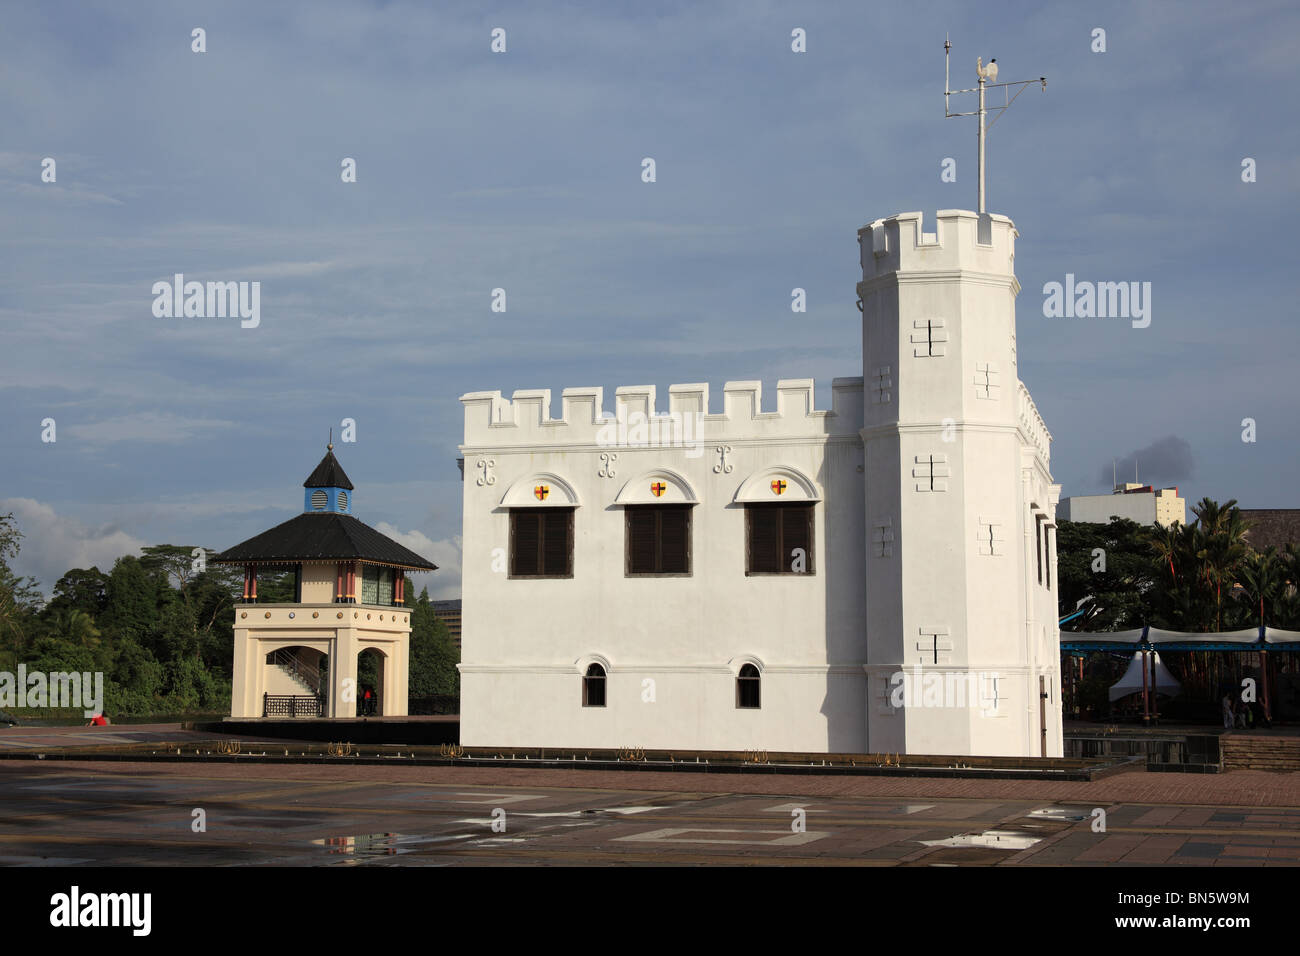 Kuching waterfront with the old Courthouse building and observation tower Stock Photo